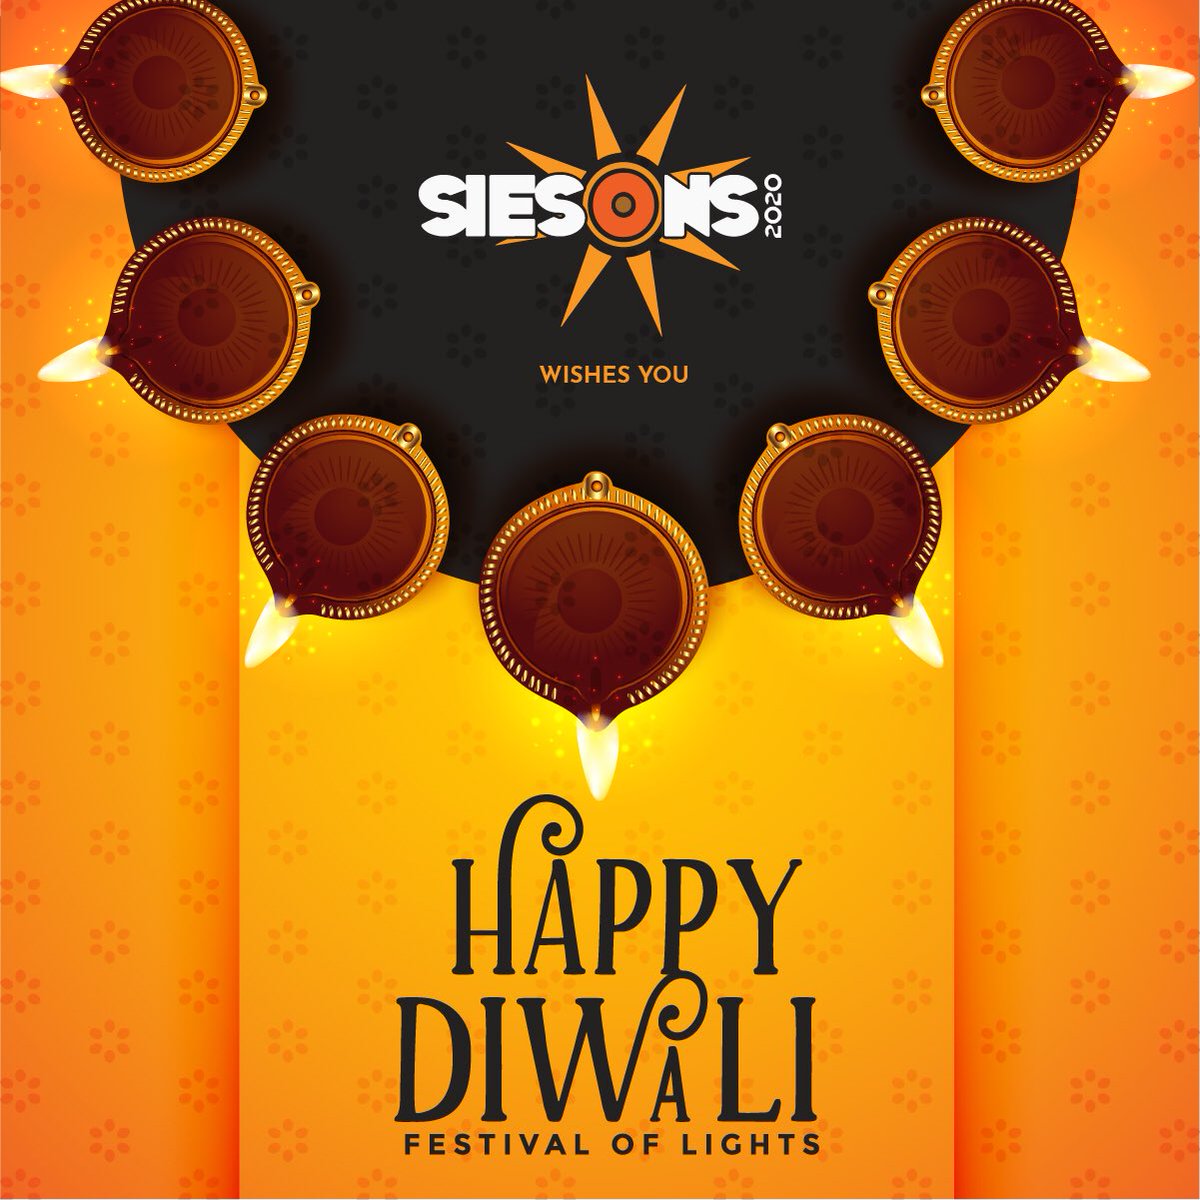 May this Diwali come with new hopes, new beginnings, new days and new dreams and illuminate a new chapter in our lives. 🎇

Wishing you all a safe and prosperous Diwali!💥

#SabkiDiwali #CelebratingHappiness #Siesons2020 #TeesraKadam #72HoursOfMadness #HappyDiwali #FestivalLights